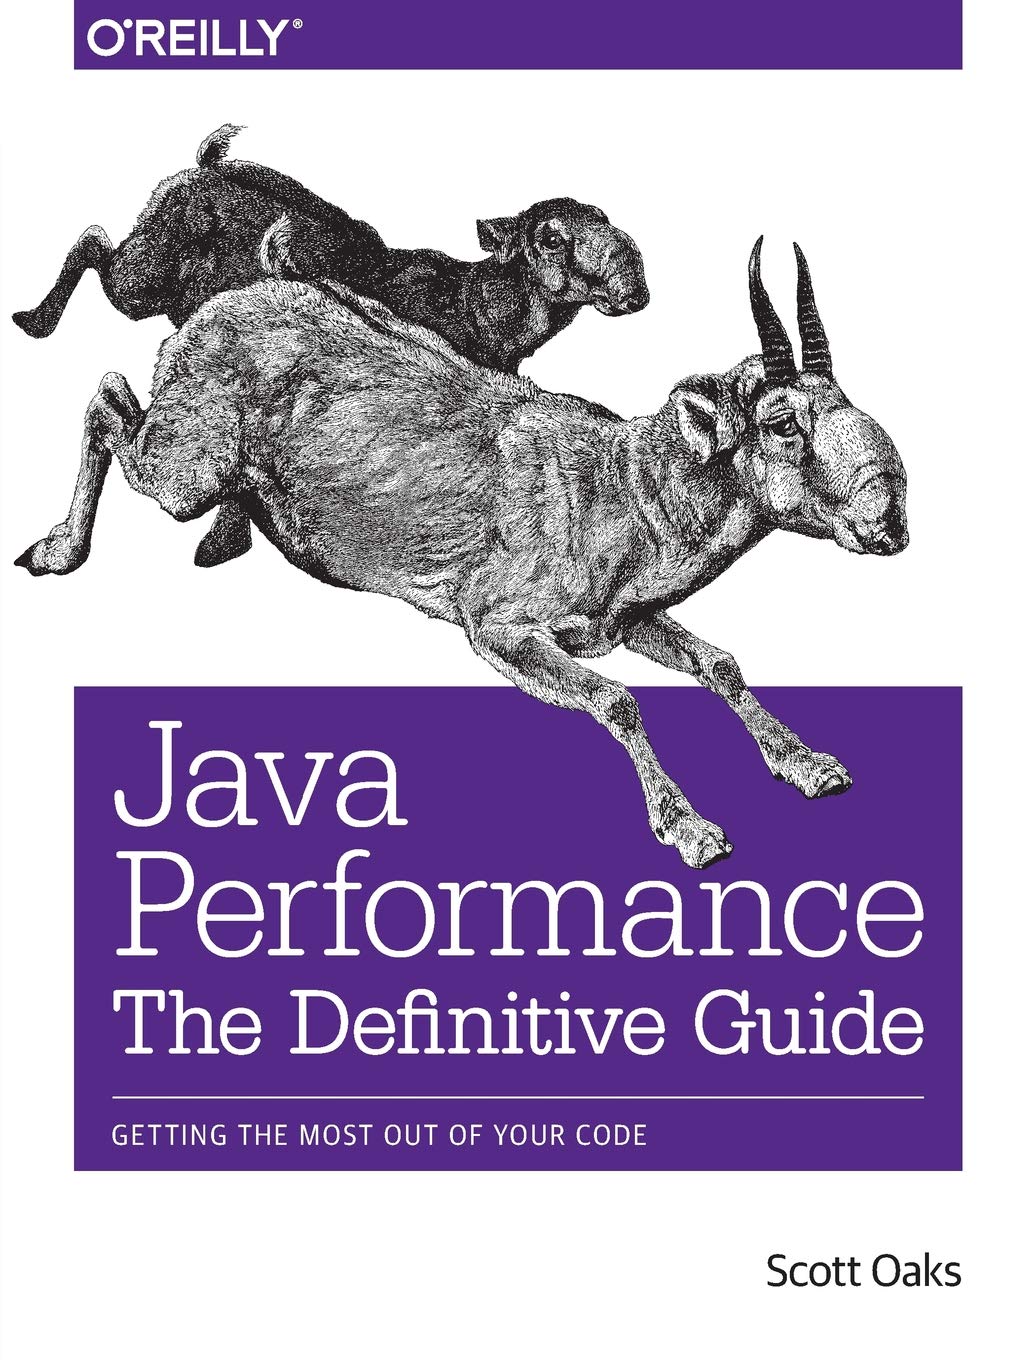 he Definitive Guide to Java Performance